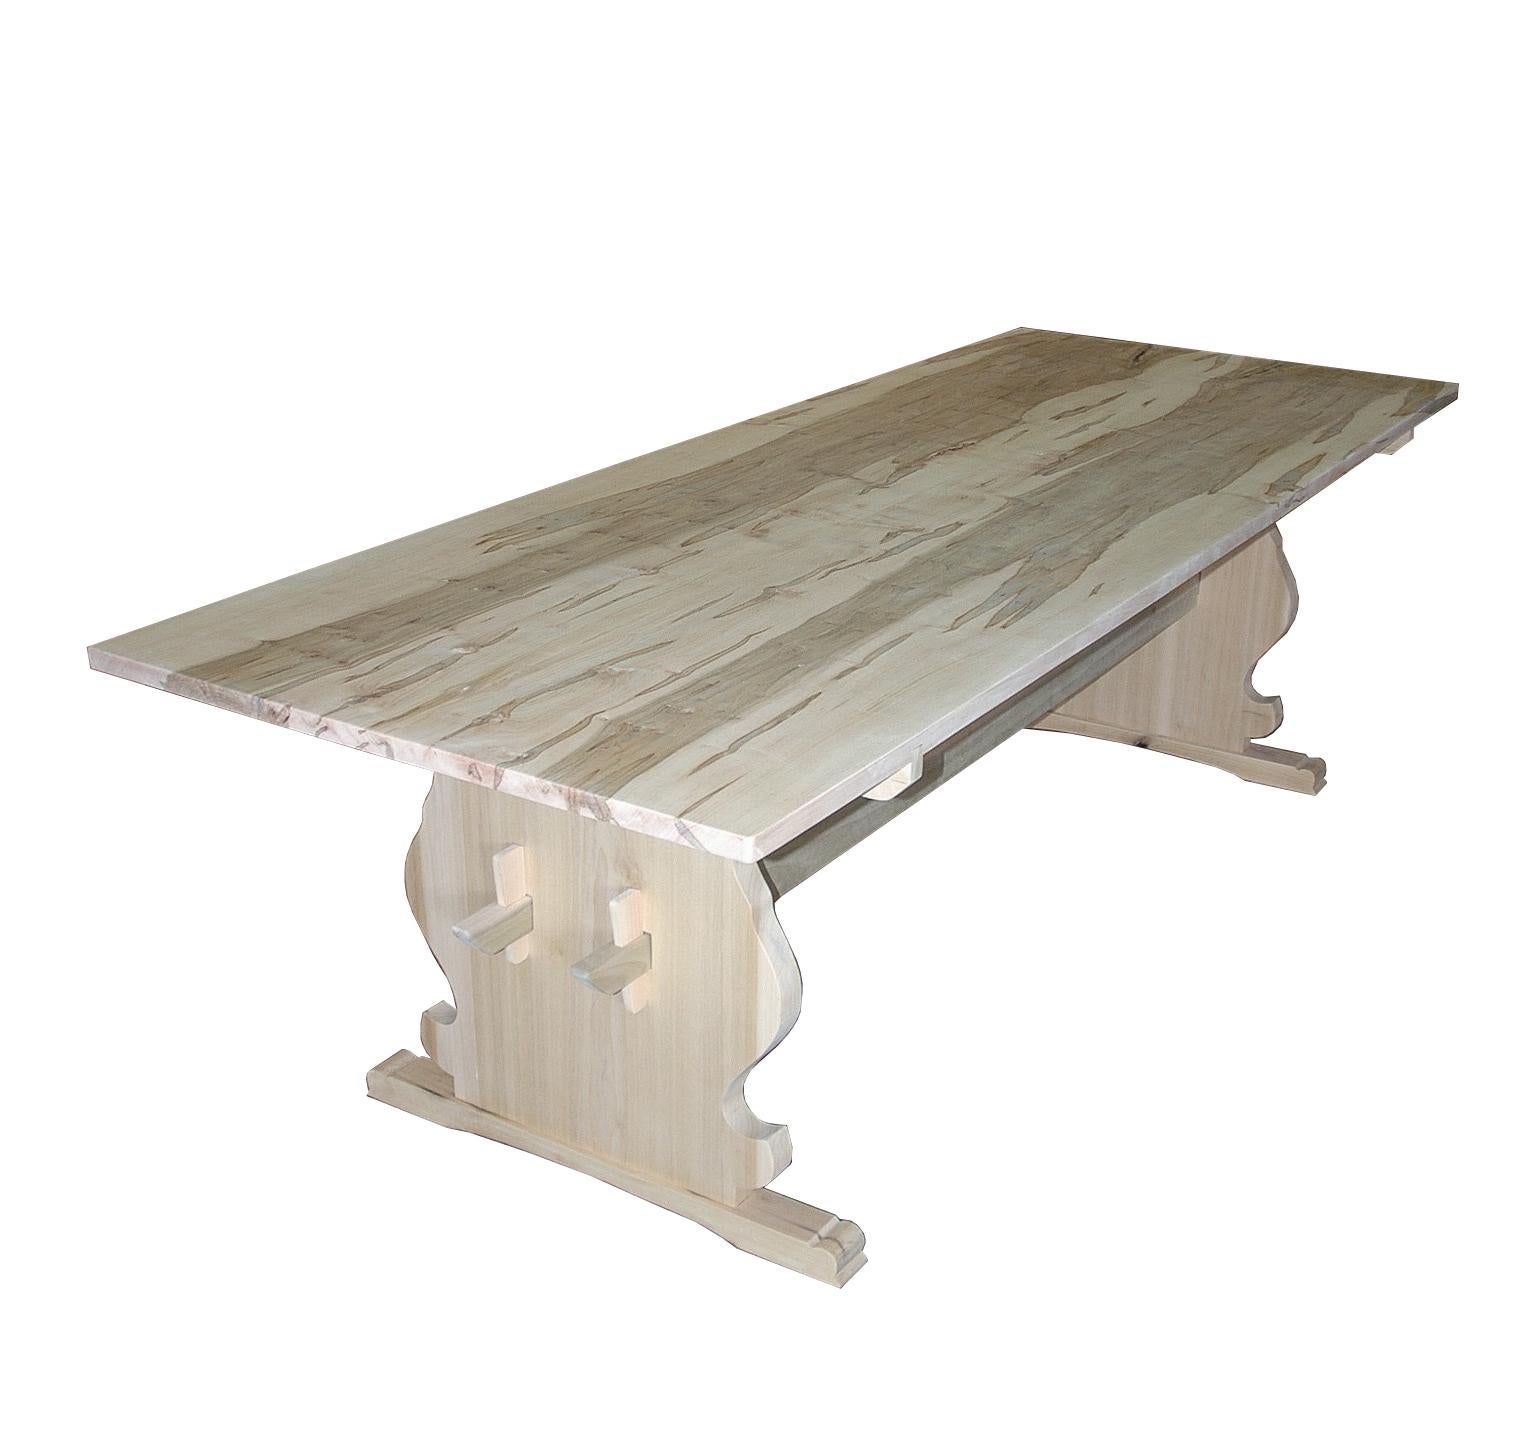 The natural look! We are now making this table in a natural wood finished with a clear acrylic satin sealer to make it user friendly without changing the color.
Great contemporary look. Shown here with a bookmatched figured maple top that is 38